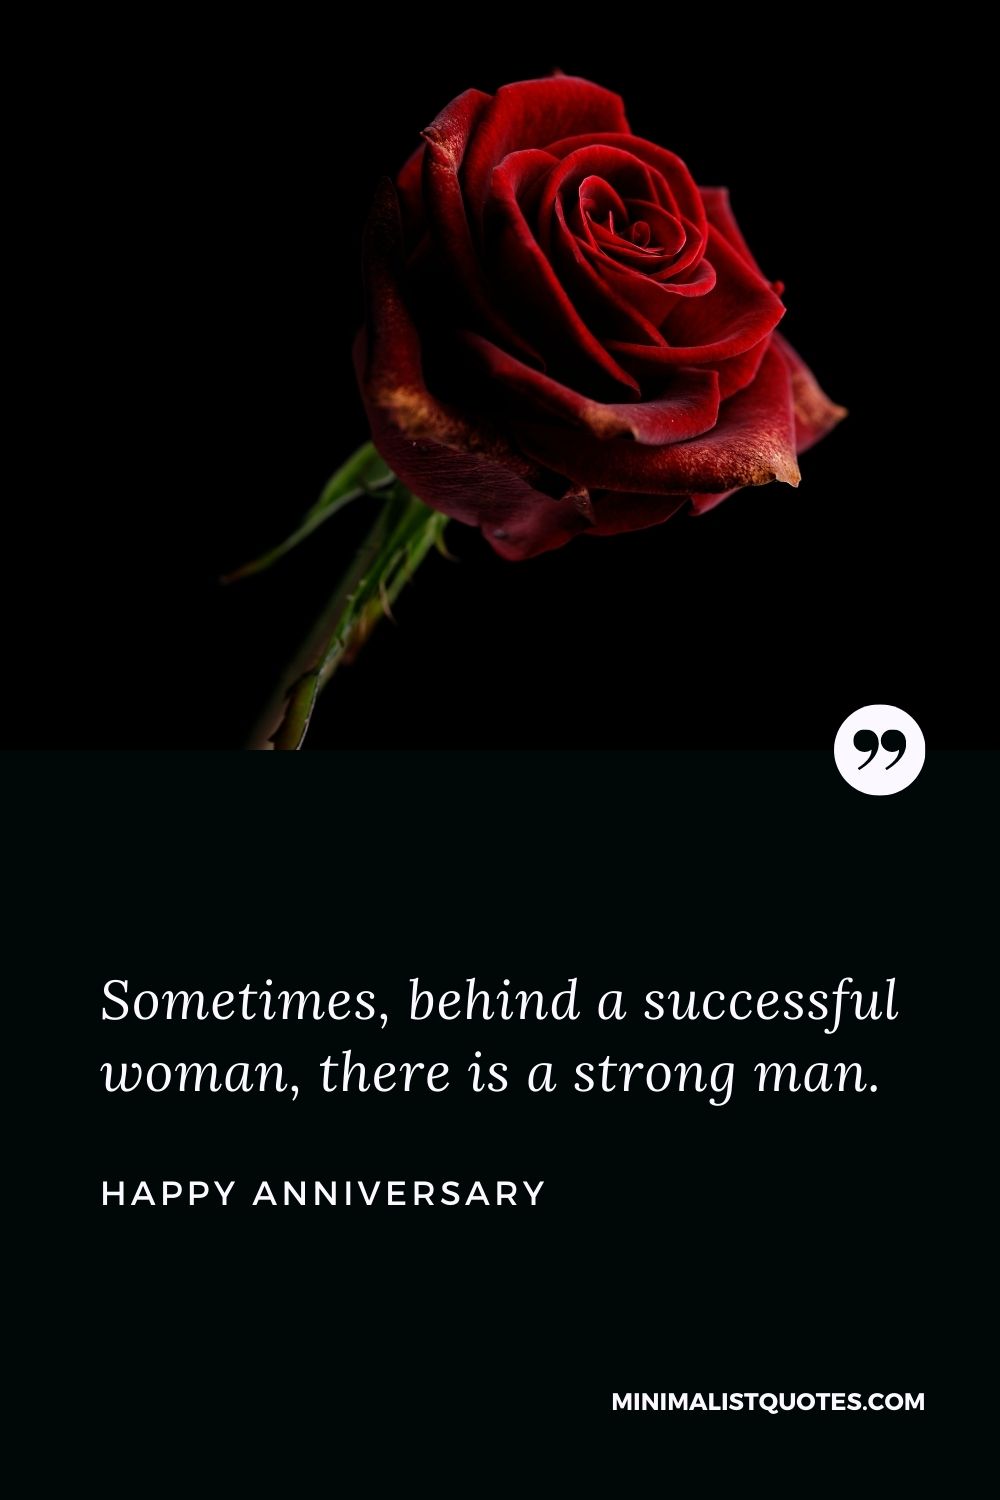 Anniversary Wish & Message With HD Image: Sometimes, behind a successful woman, there is a strong man.